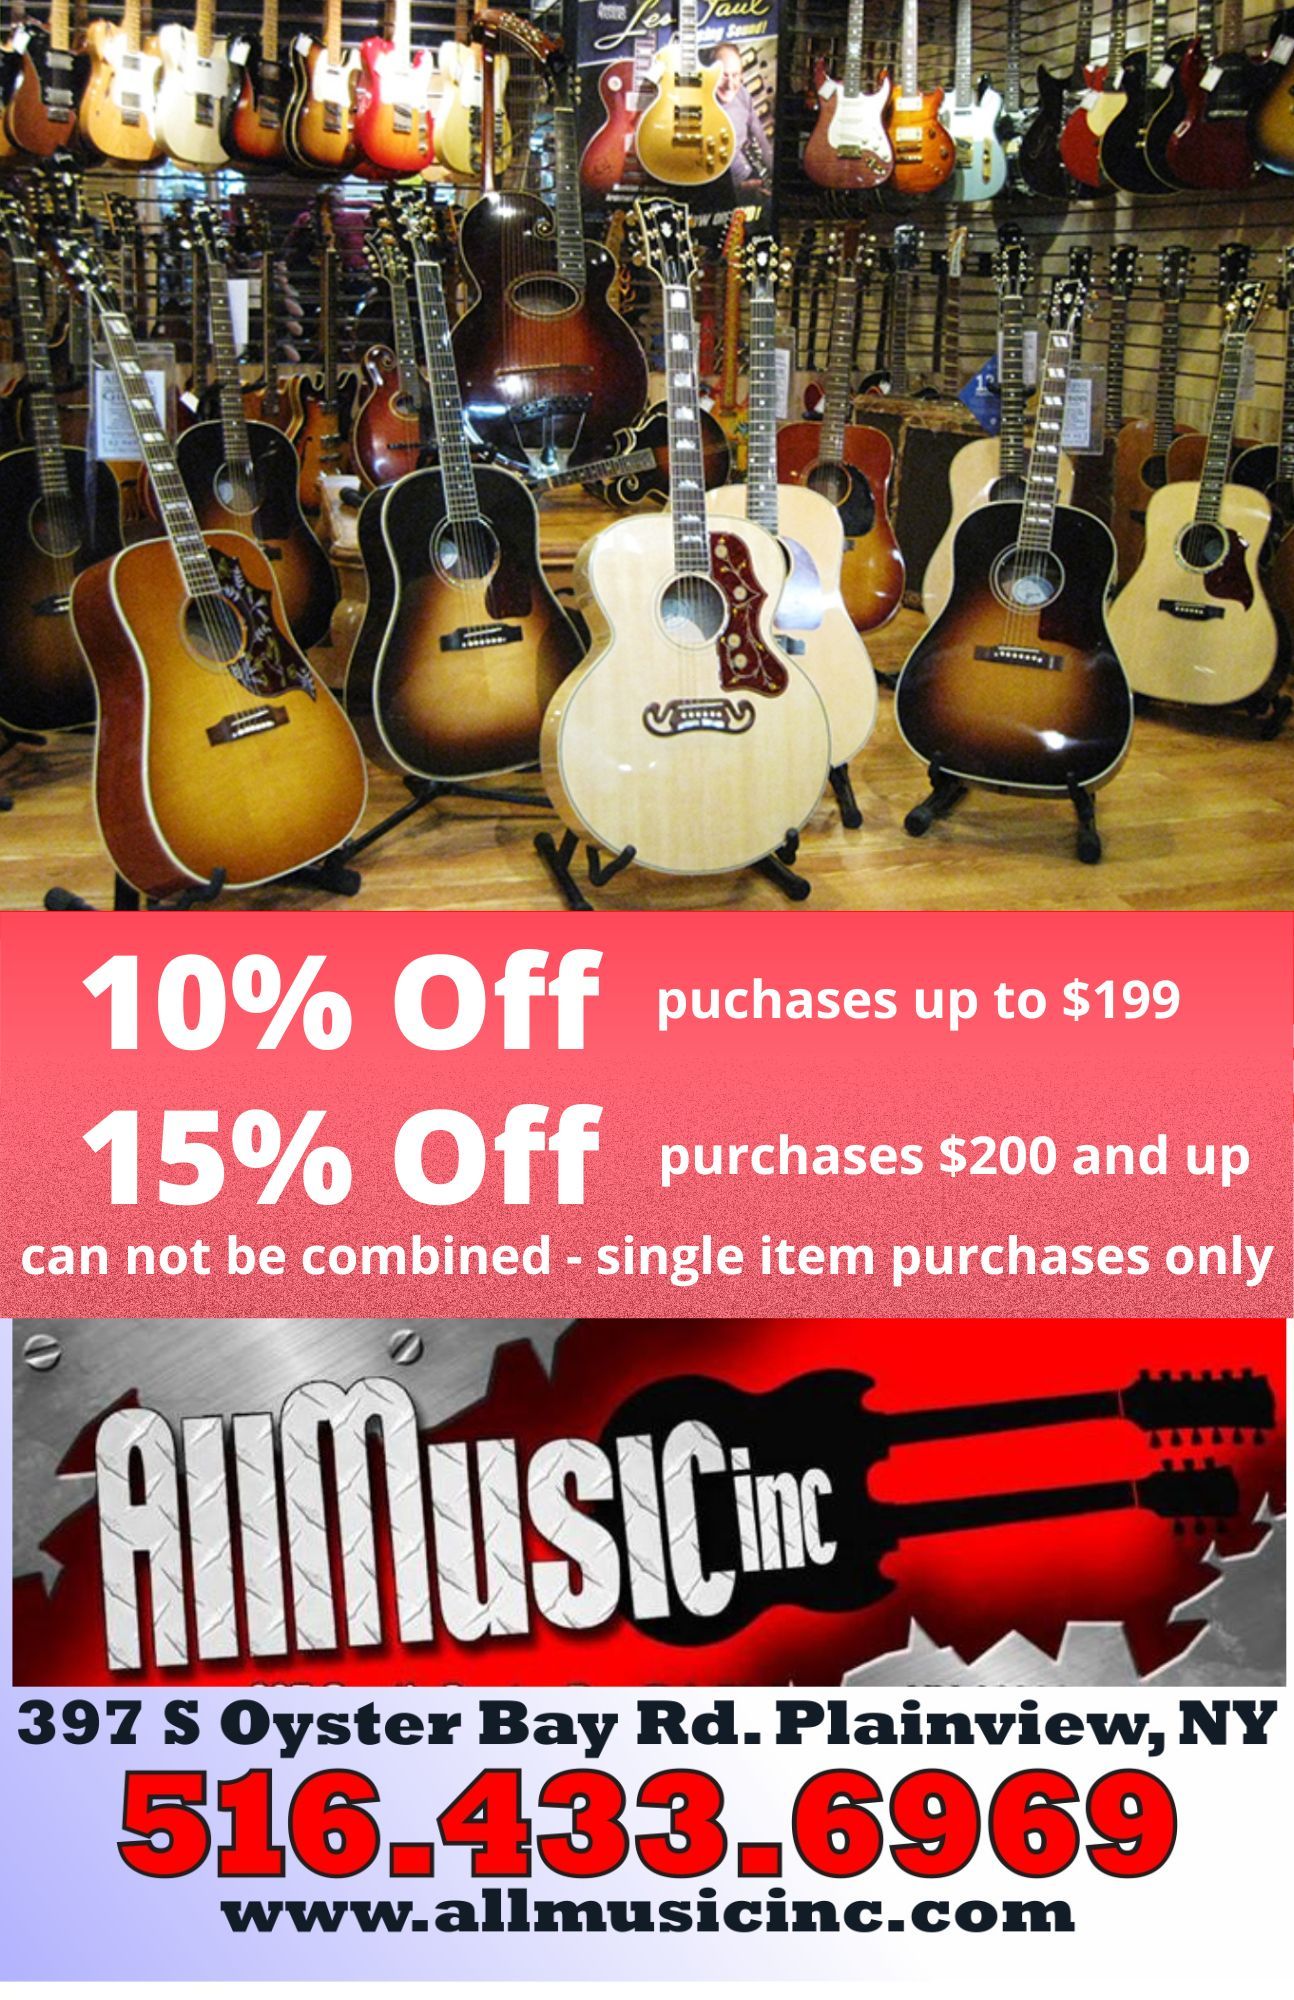 An advertisement for all music inc. in plainview ny